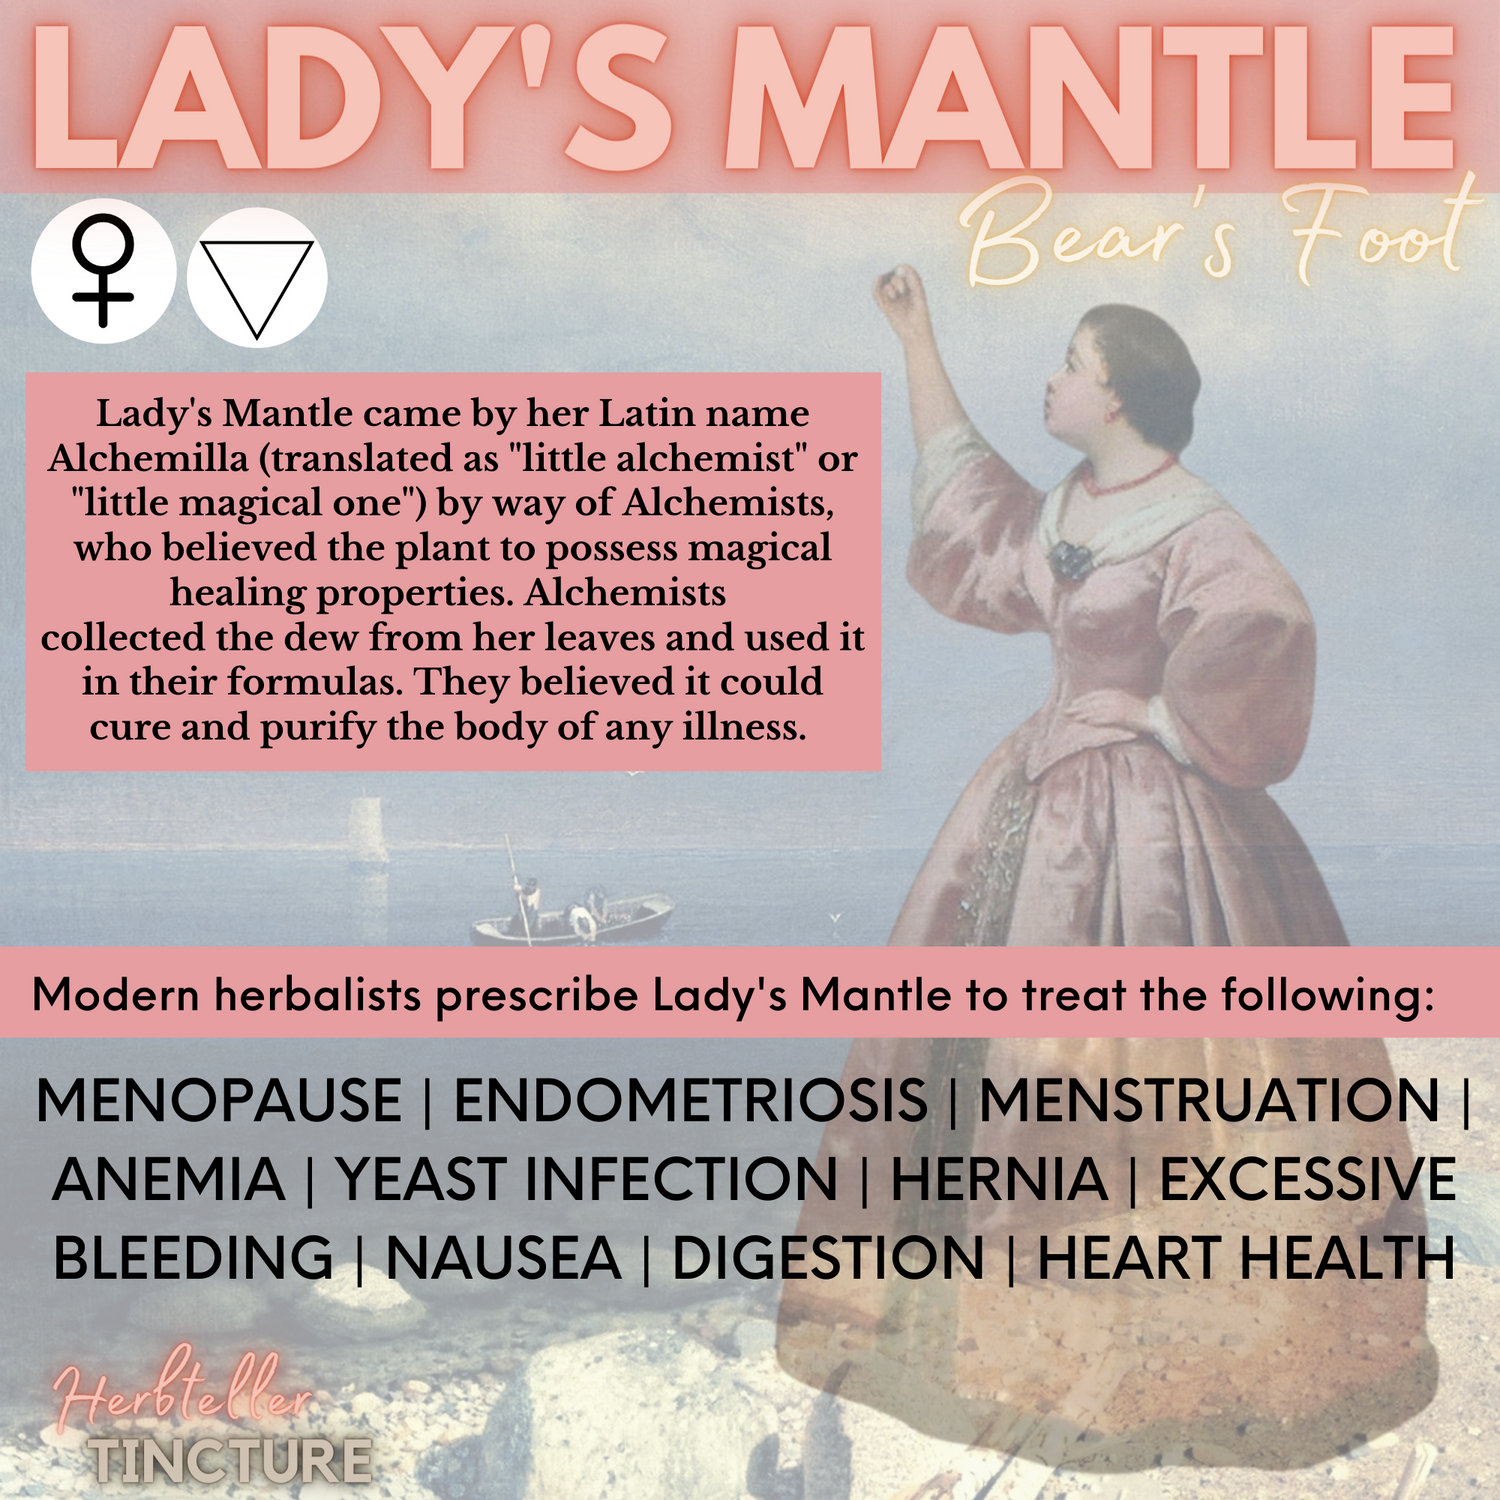 Lady's Mantle (Bear's Foot) Herbal Tincture - Original City Apothecary